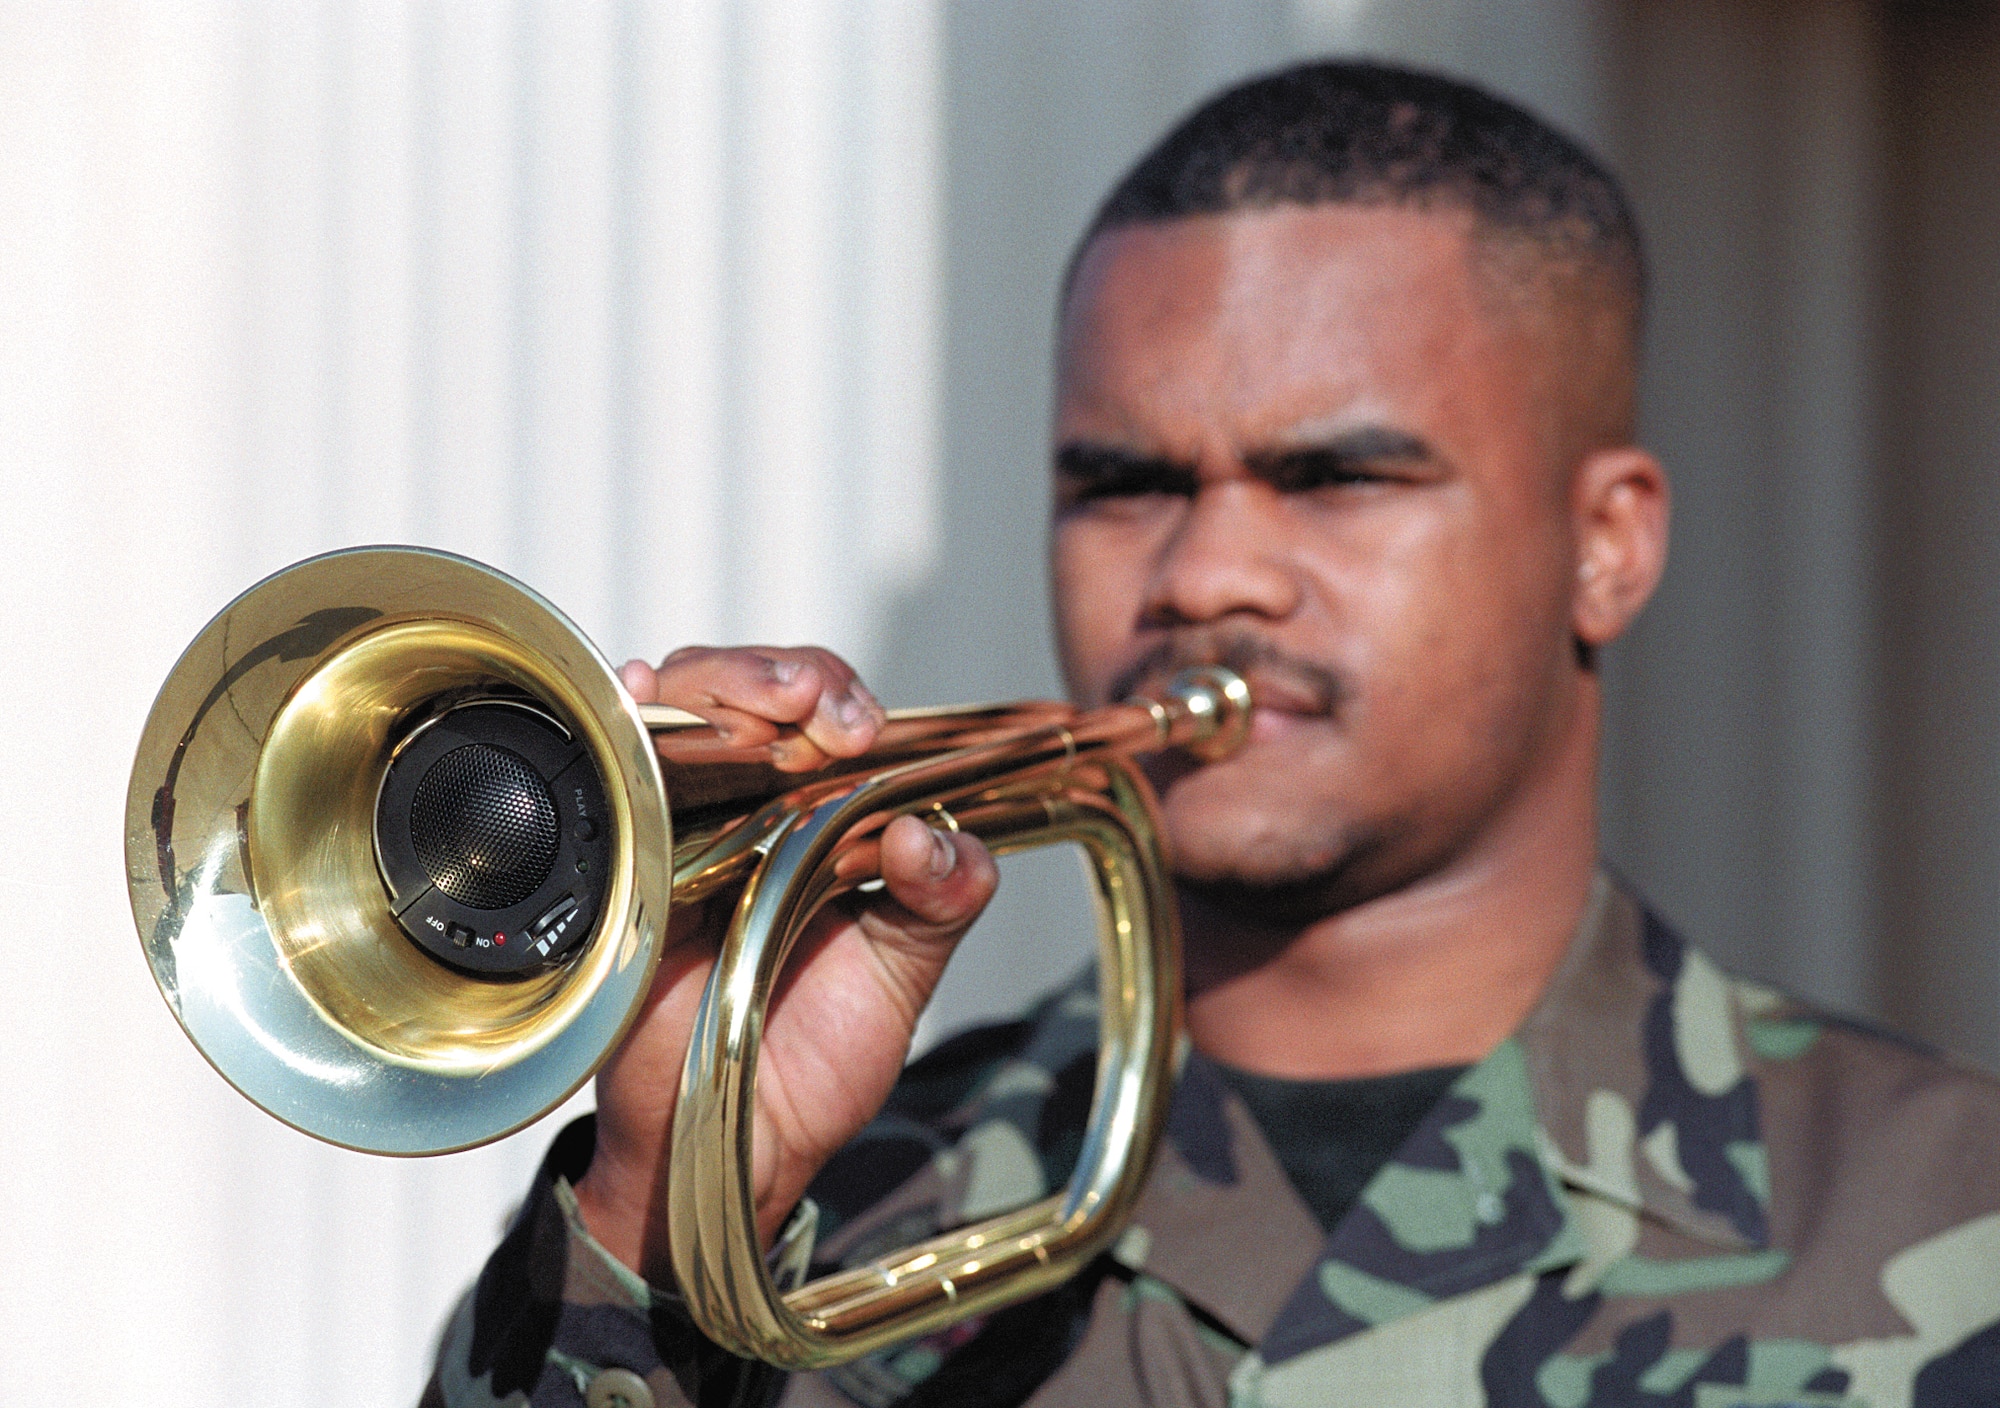 TINKER AIR FORCE BASE, Okla. -- A recorder that plays "Taps" tucks inside a special bugle held by Senior Airman Eric Young.  Tinker Air Force Base Honor Guard members said they welcome the bugles over the stereos they had to use in the past.  Airman Young is an honor guard supply technician and bugler.  (U.S. Air Force photo by Margo Wright)